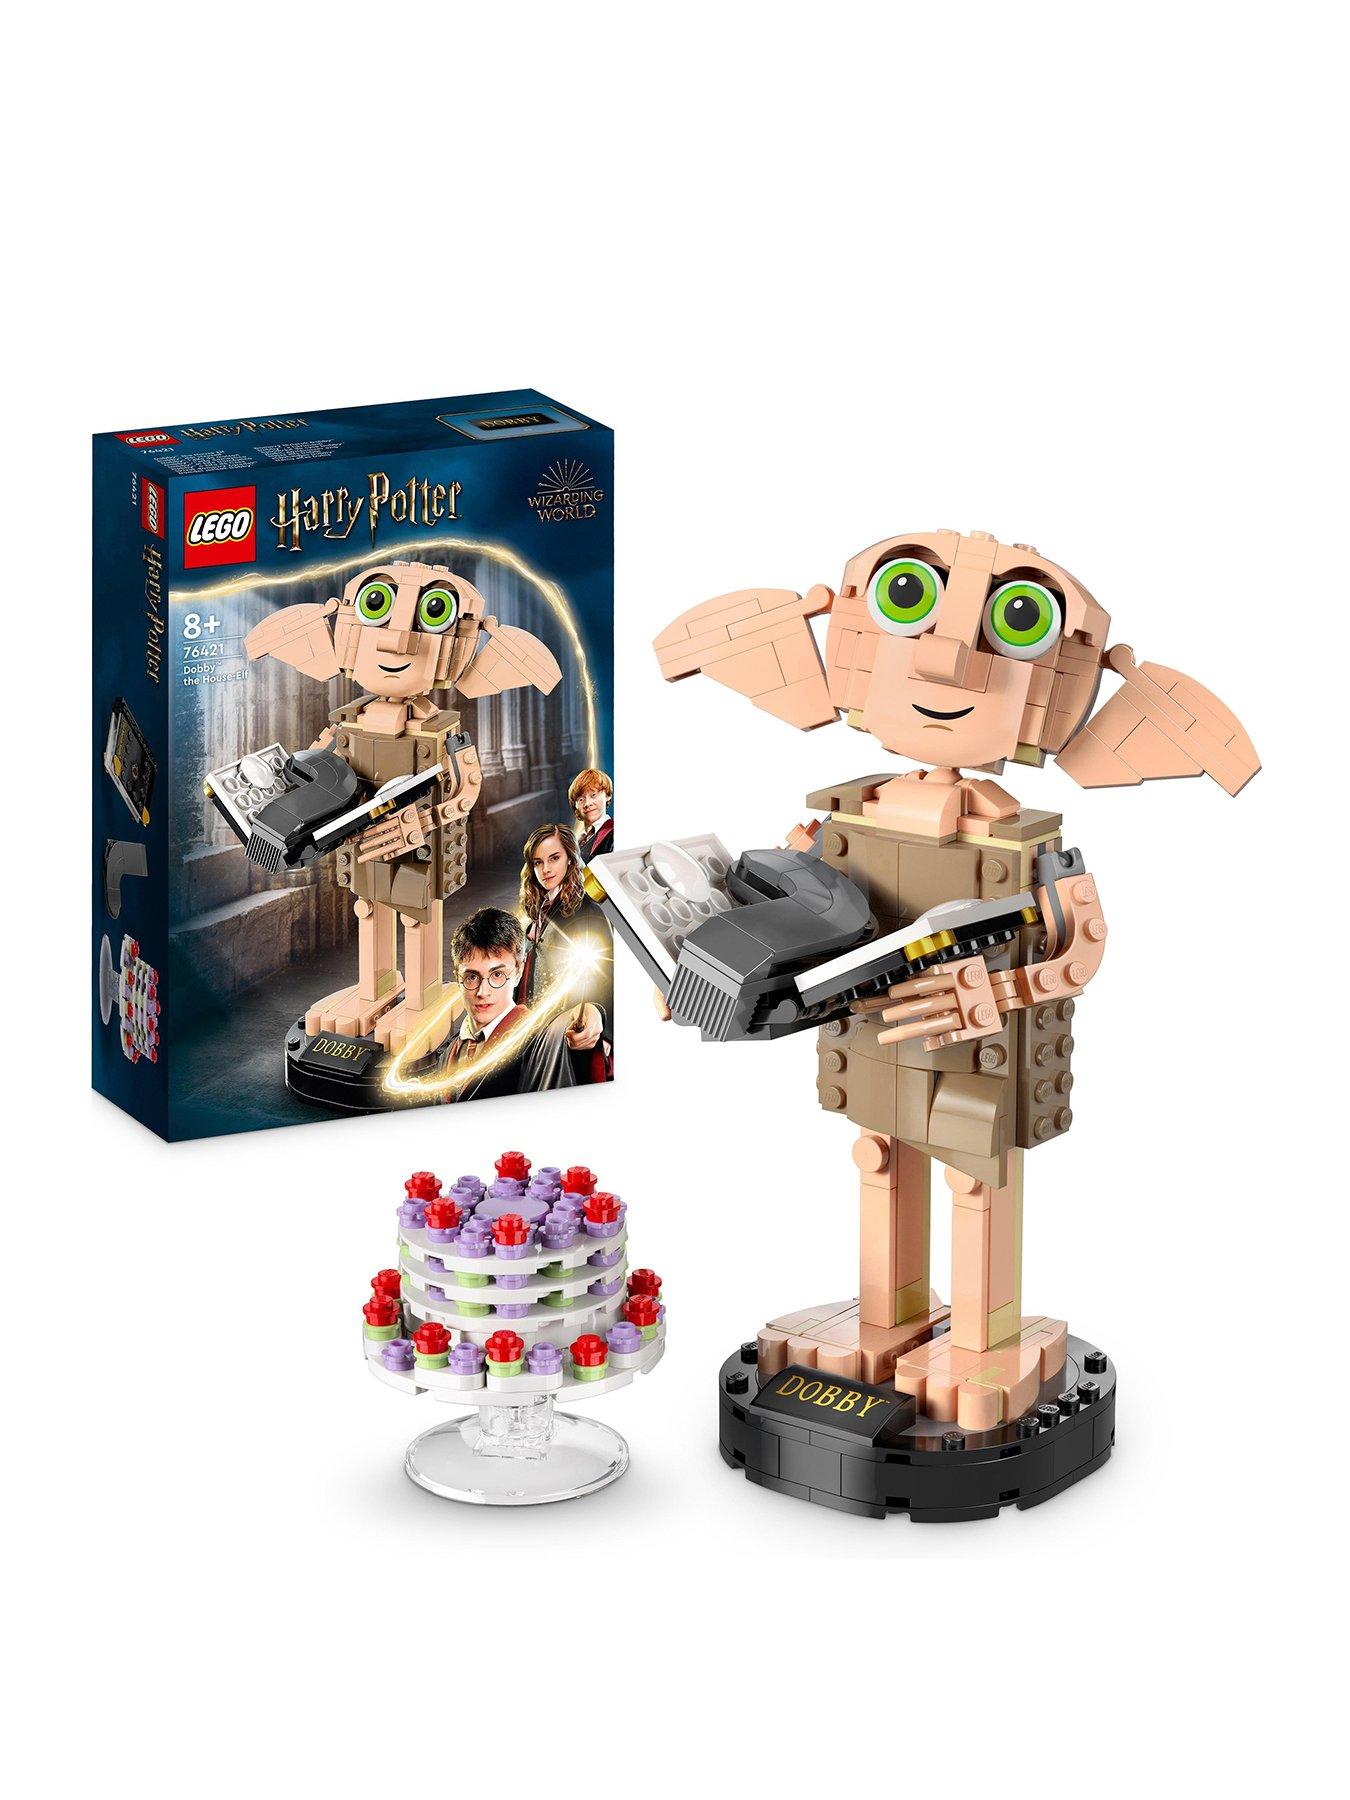 Time's Up! - Harry Potter, 24,49 €